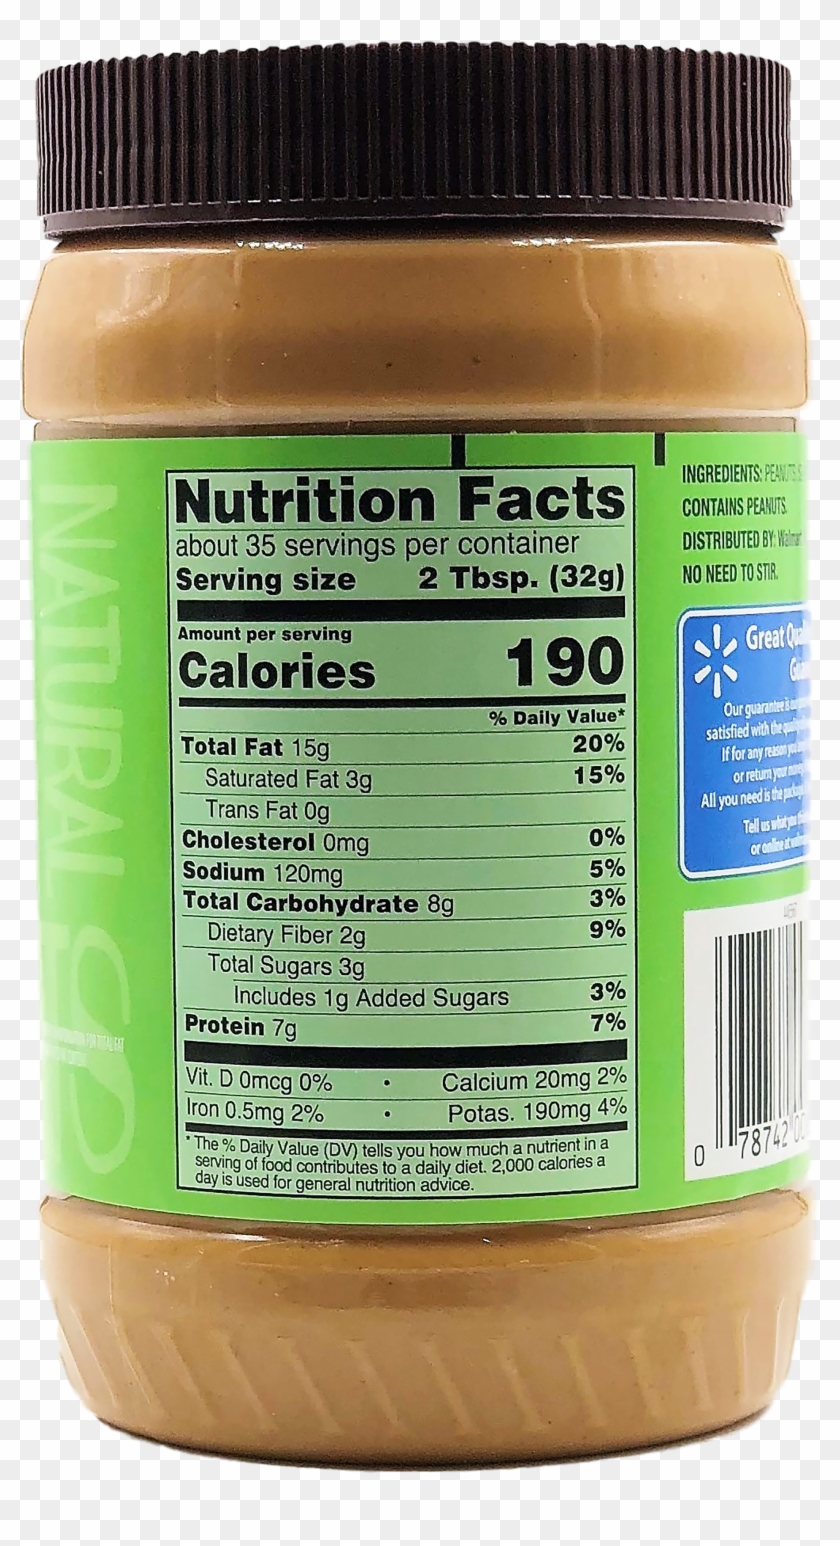 Great Value No Stir Creamy Natural Peanut Butter Spread, - Nutrition Facts Clipart #241519